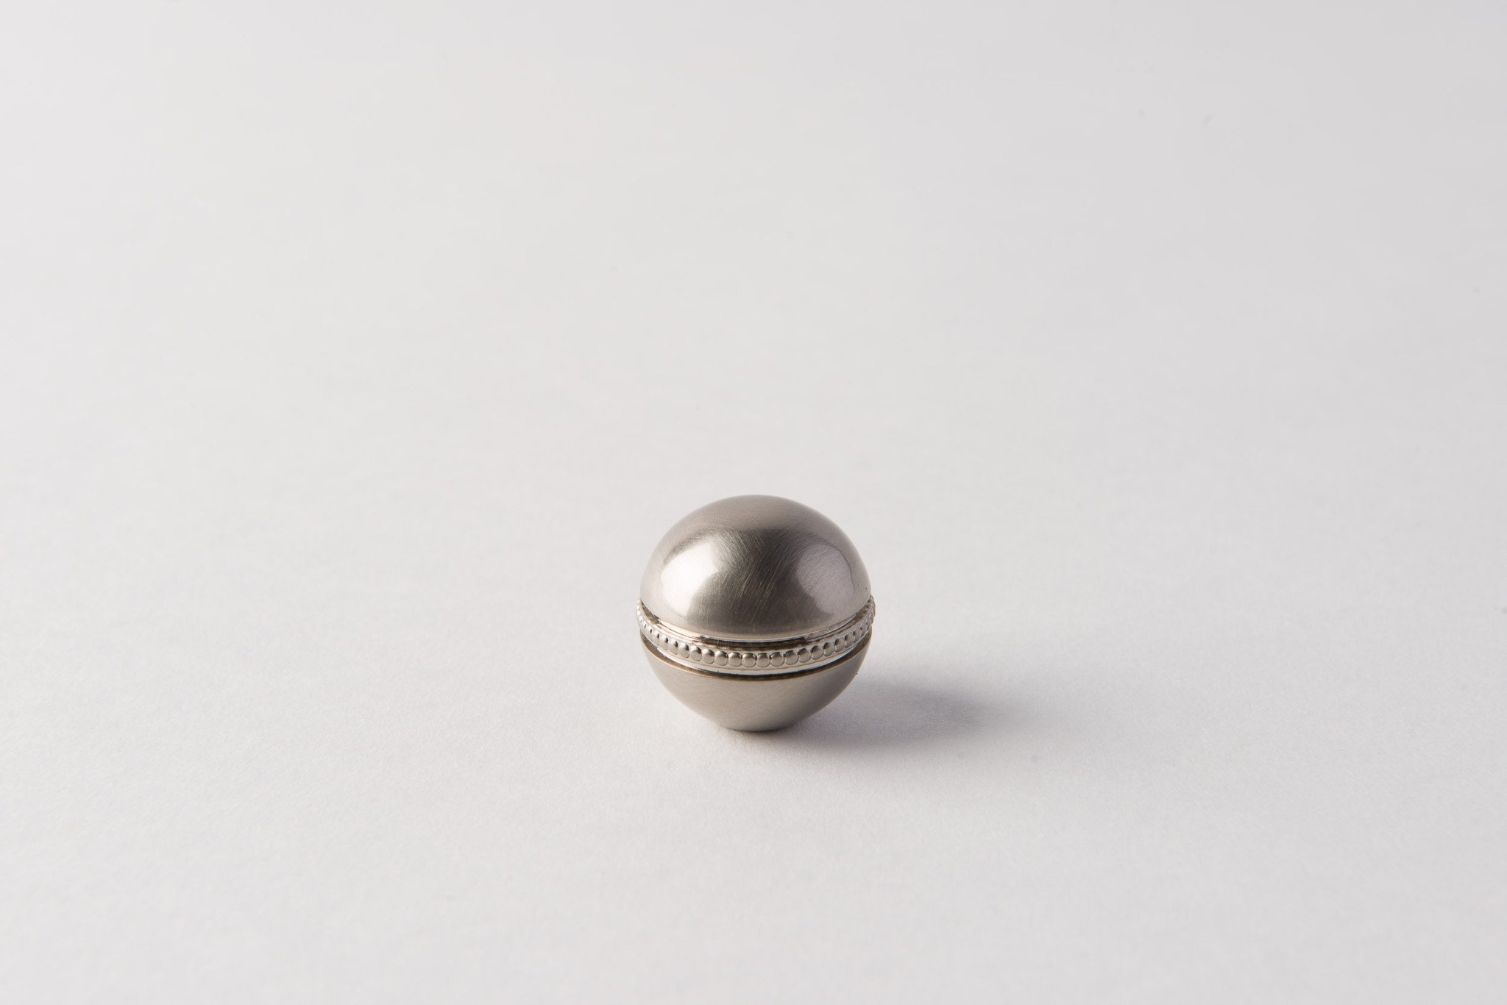 https://www.hotel-lamps.com/resources/assets/images/product_images/1599813835.Brushed Nickel_Beaded Ball 20mm.jpg